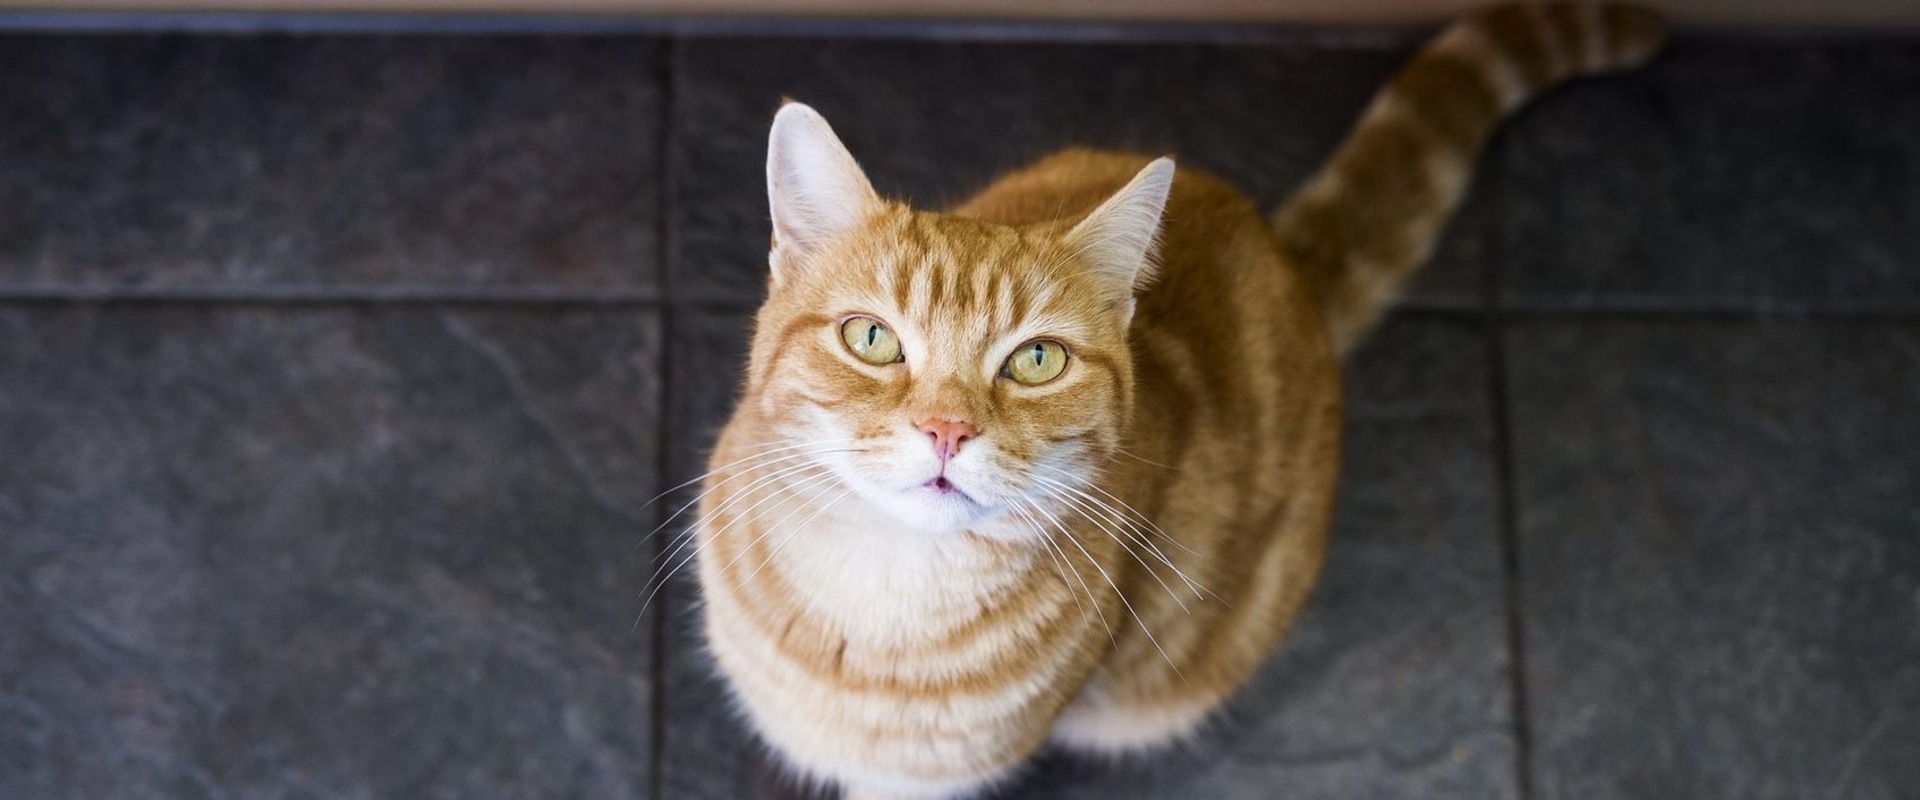 Common Cat Behaviors: What You Need to Know